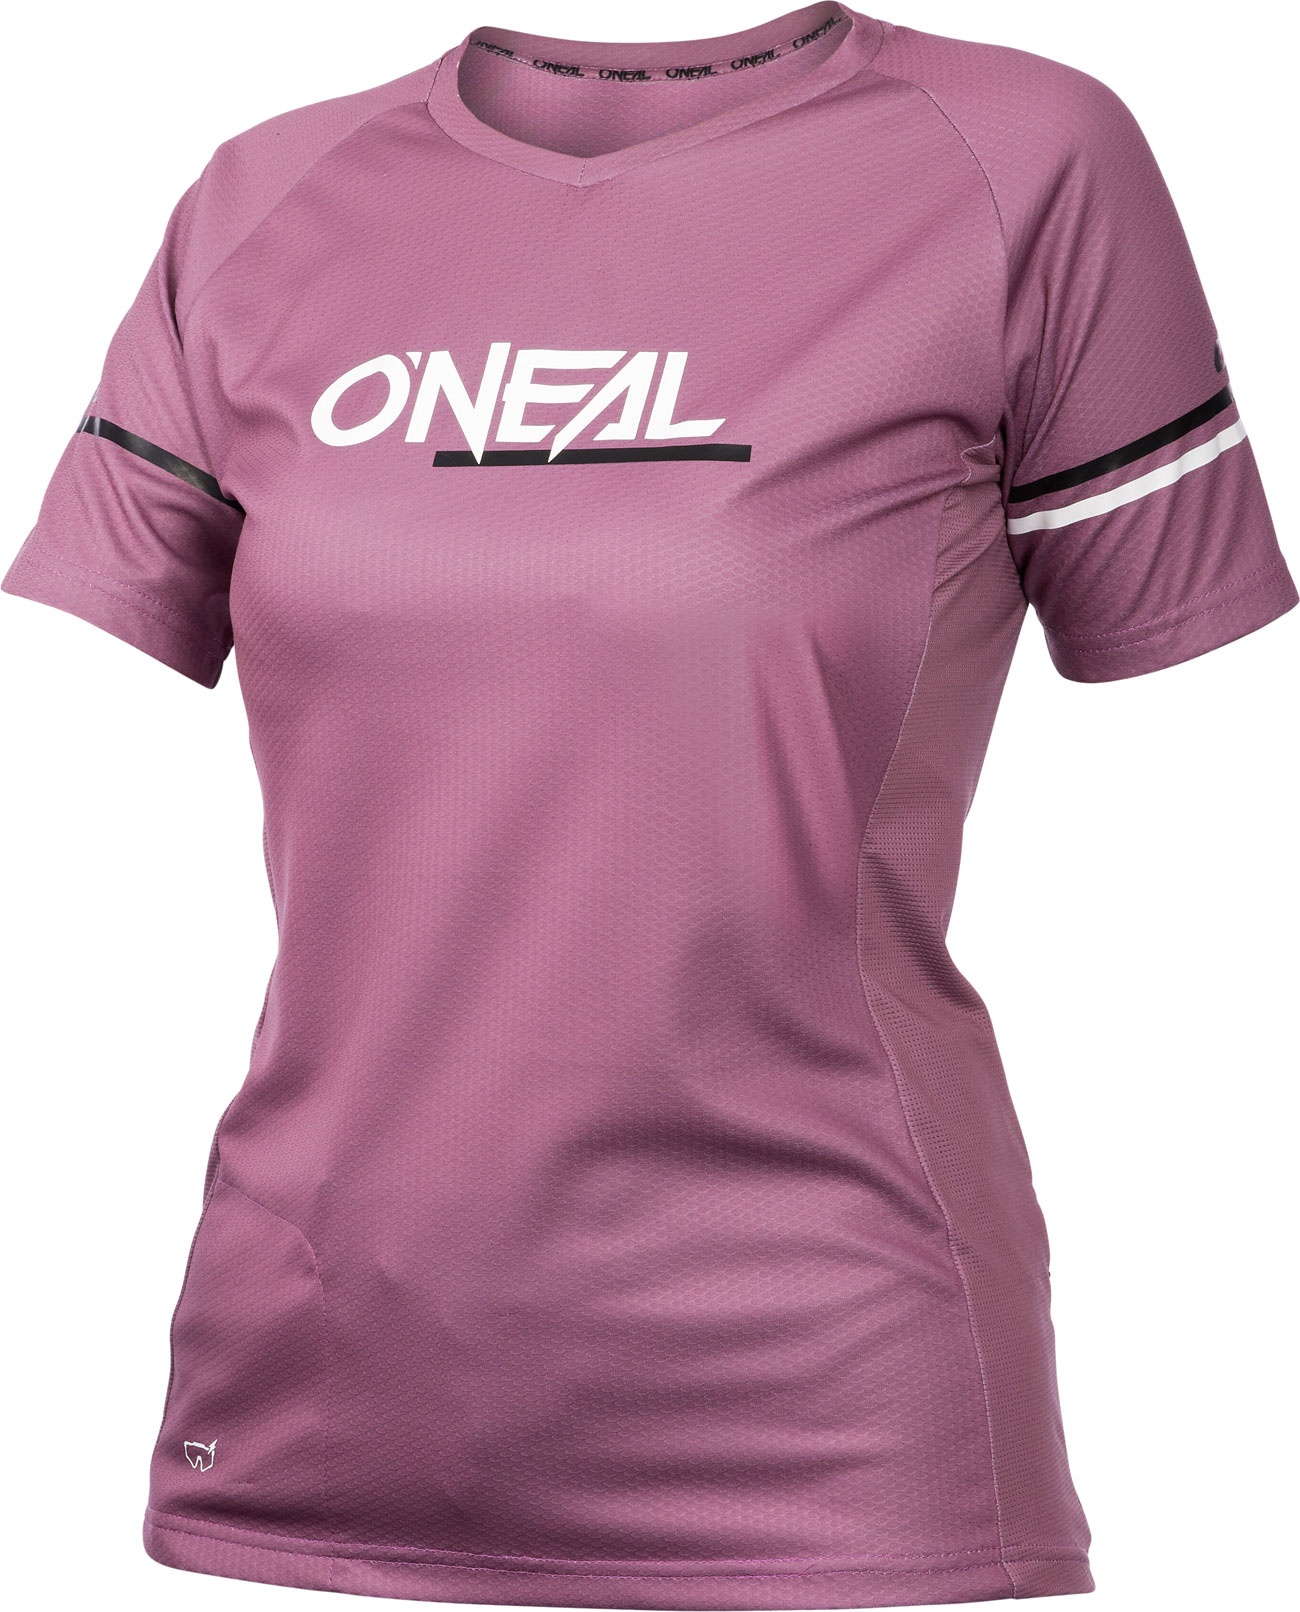 ONeal Soul S23, maillot femme - Fuchsia - M